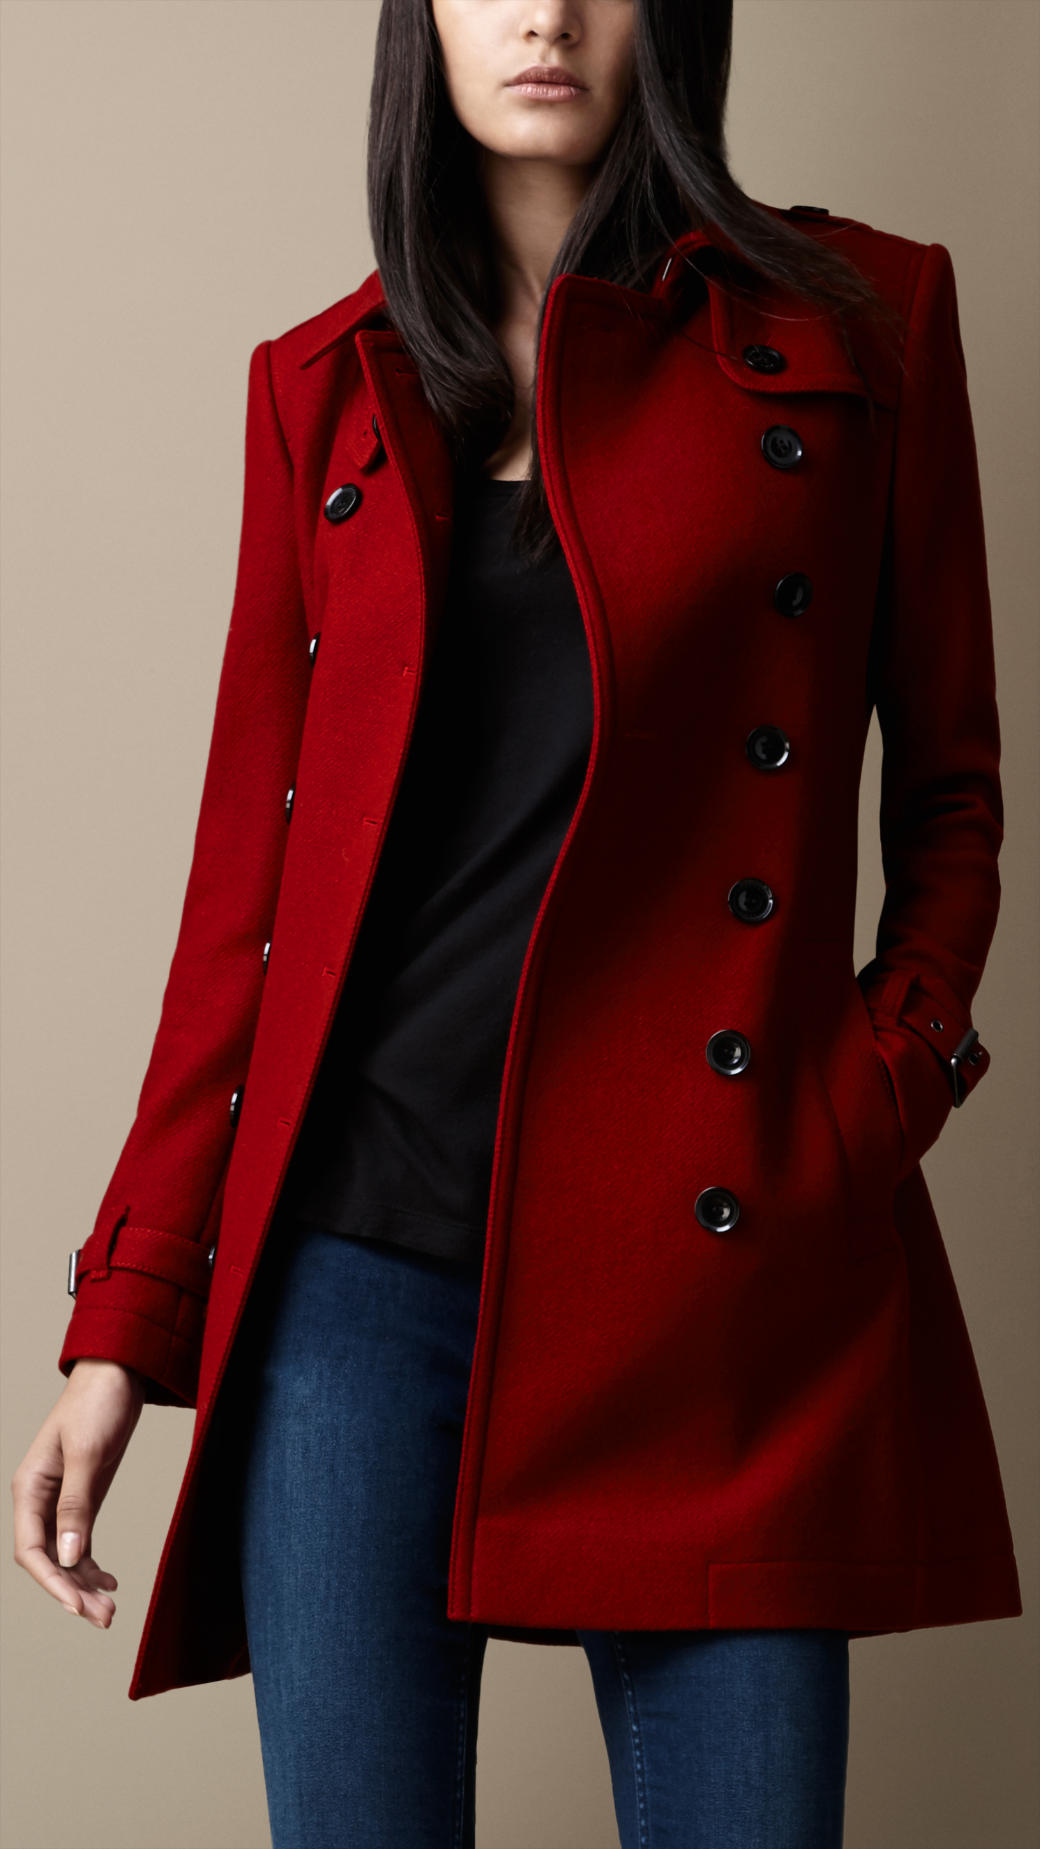 Burberry Midlength Wool Blend Trench Coat in Damson Red (Red) | Lyst